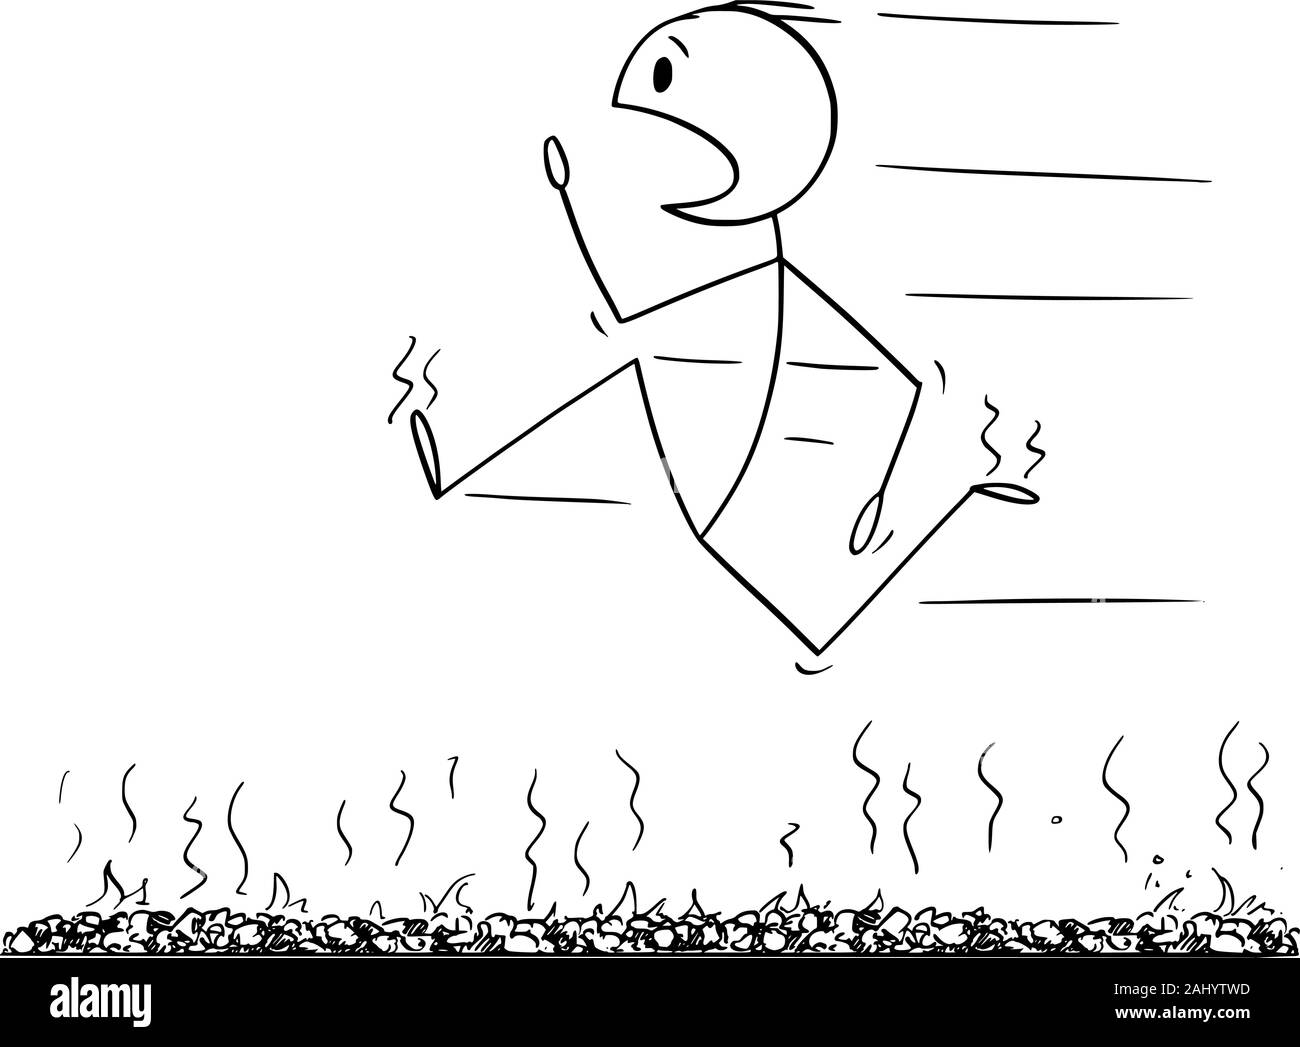 Vector cartoon stick figure drawing conceptual illustration of firewalk, man or businessman running fast in panic or firewalking barefoot over bed of hot embers or stones. Stock Vector